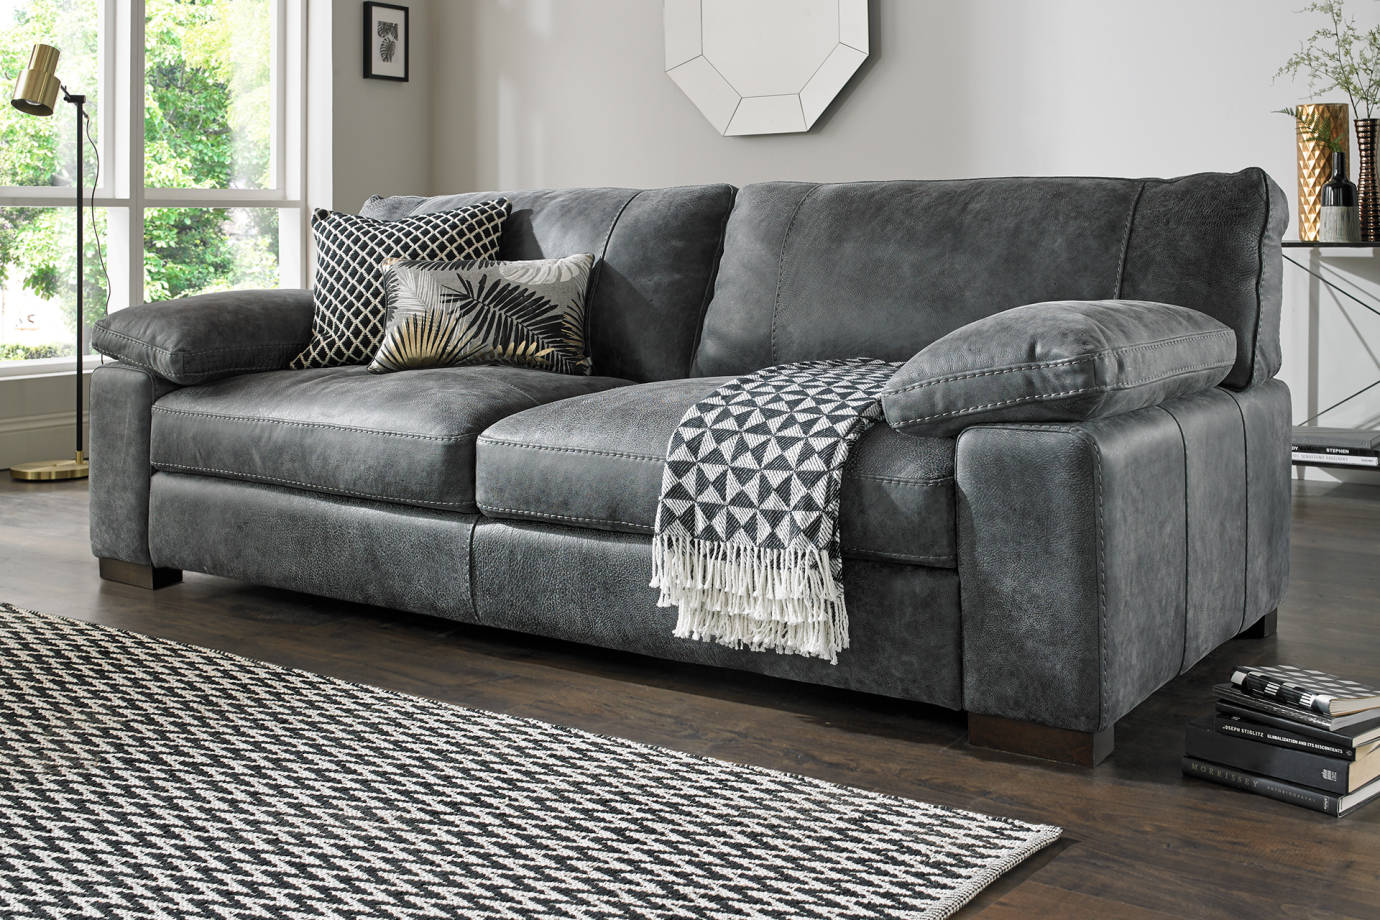 Leather Sofas Sofology, Grey Leather Living Room Furniture